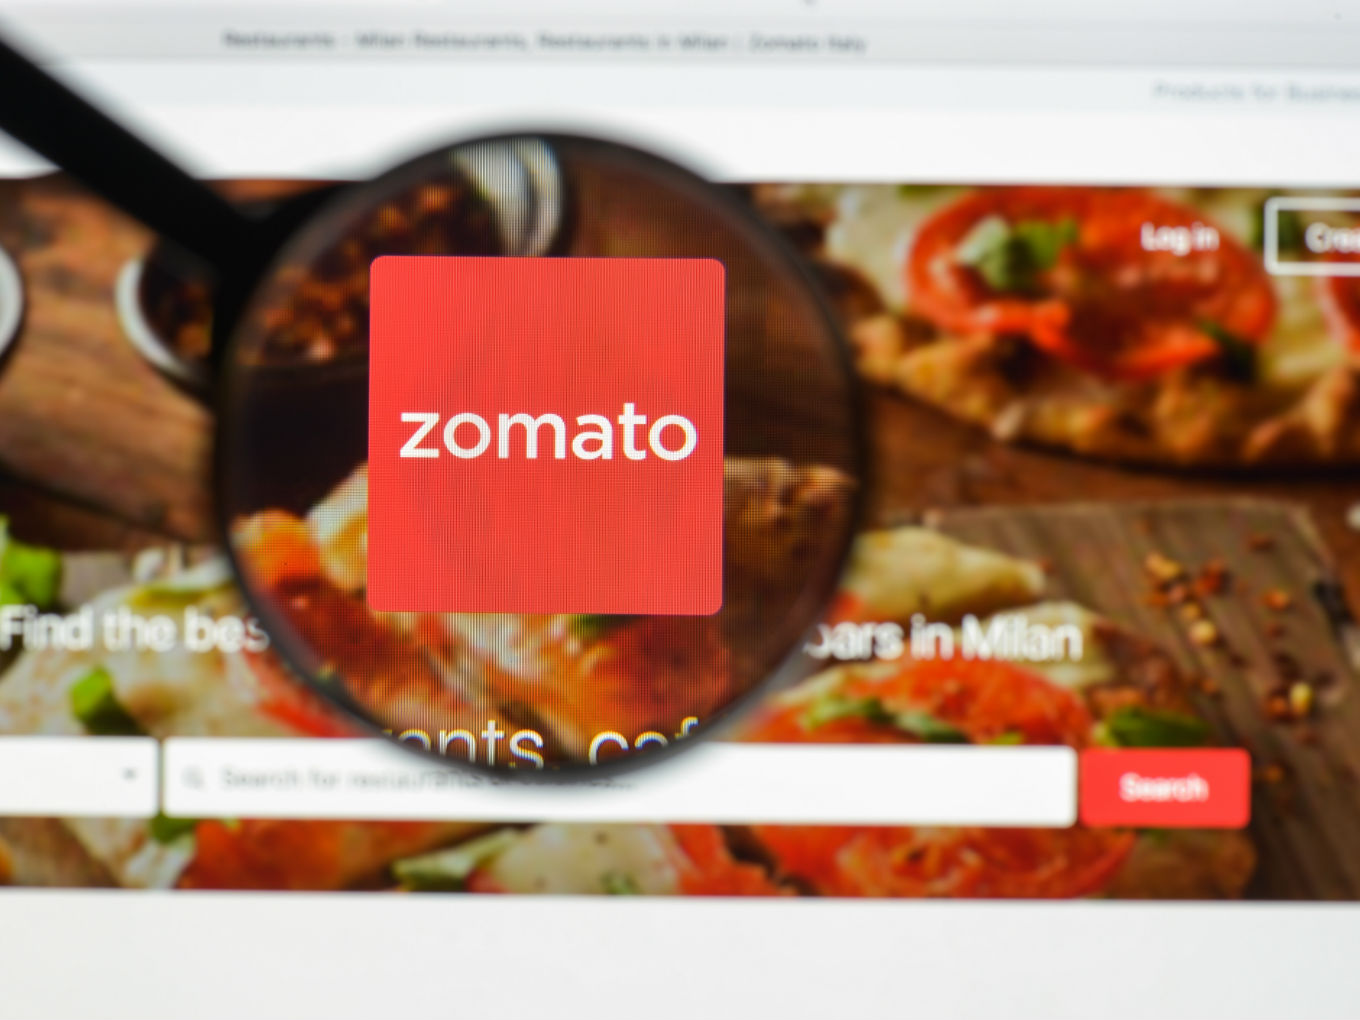 Zomato Risks Social Media Outrage With Major Zomato Gold Changes